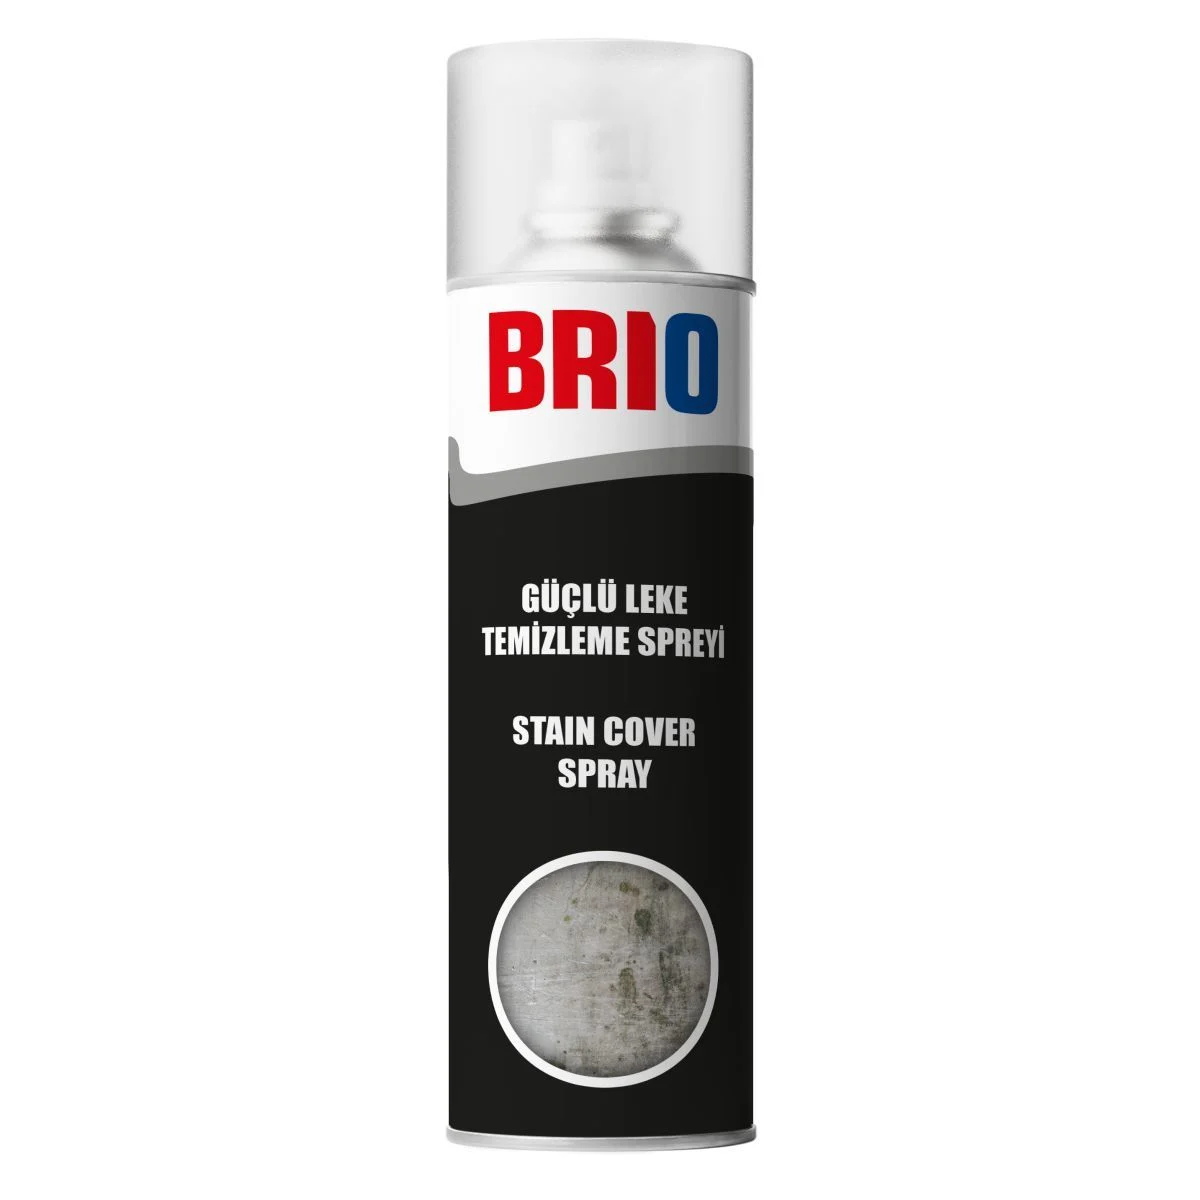 Strong%20Stain%20Cover%20Spray%20500%20Ml